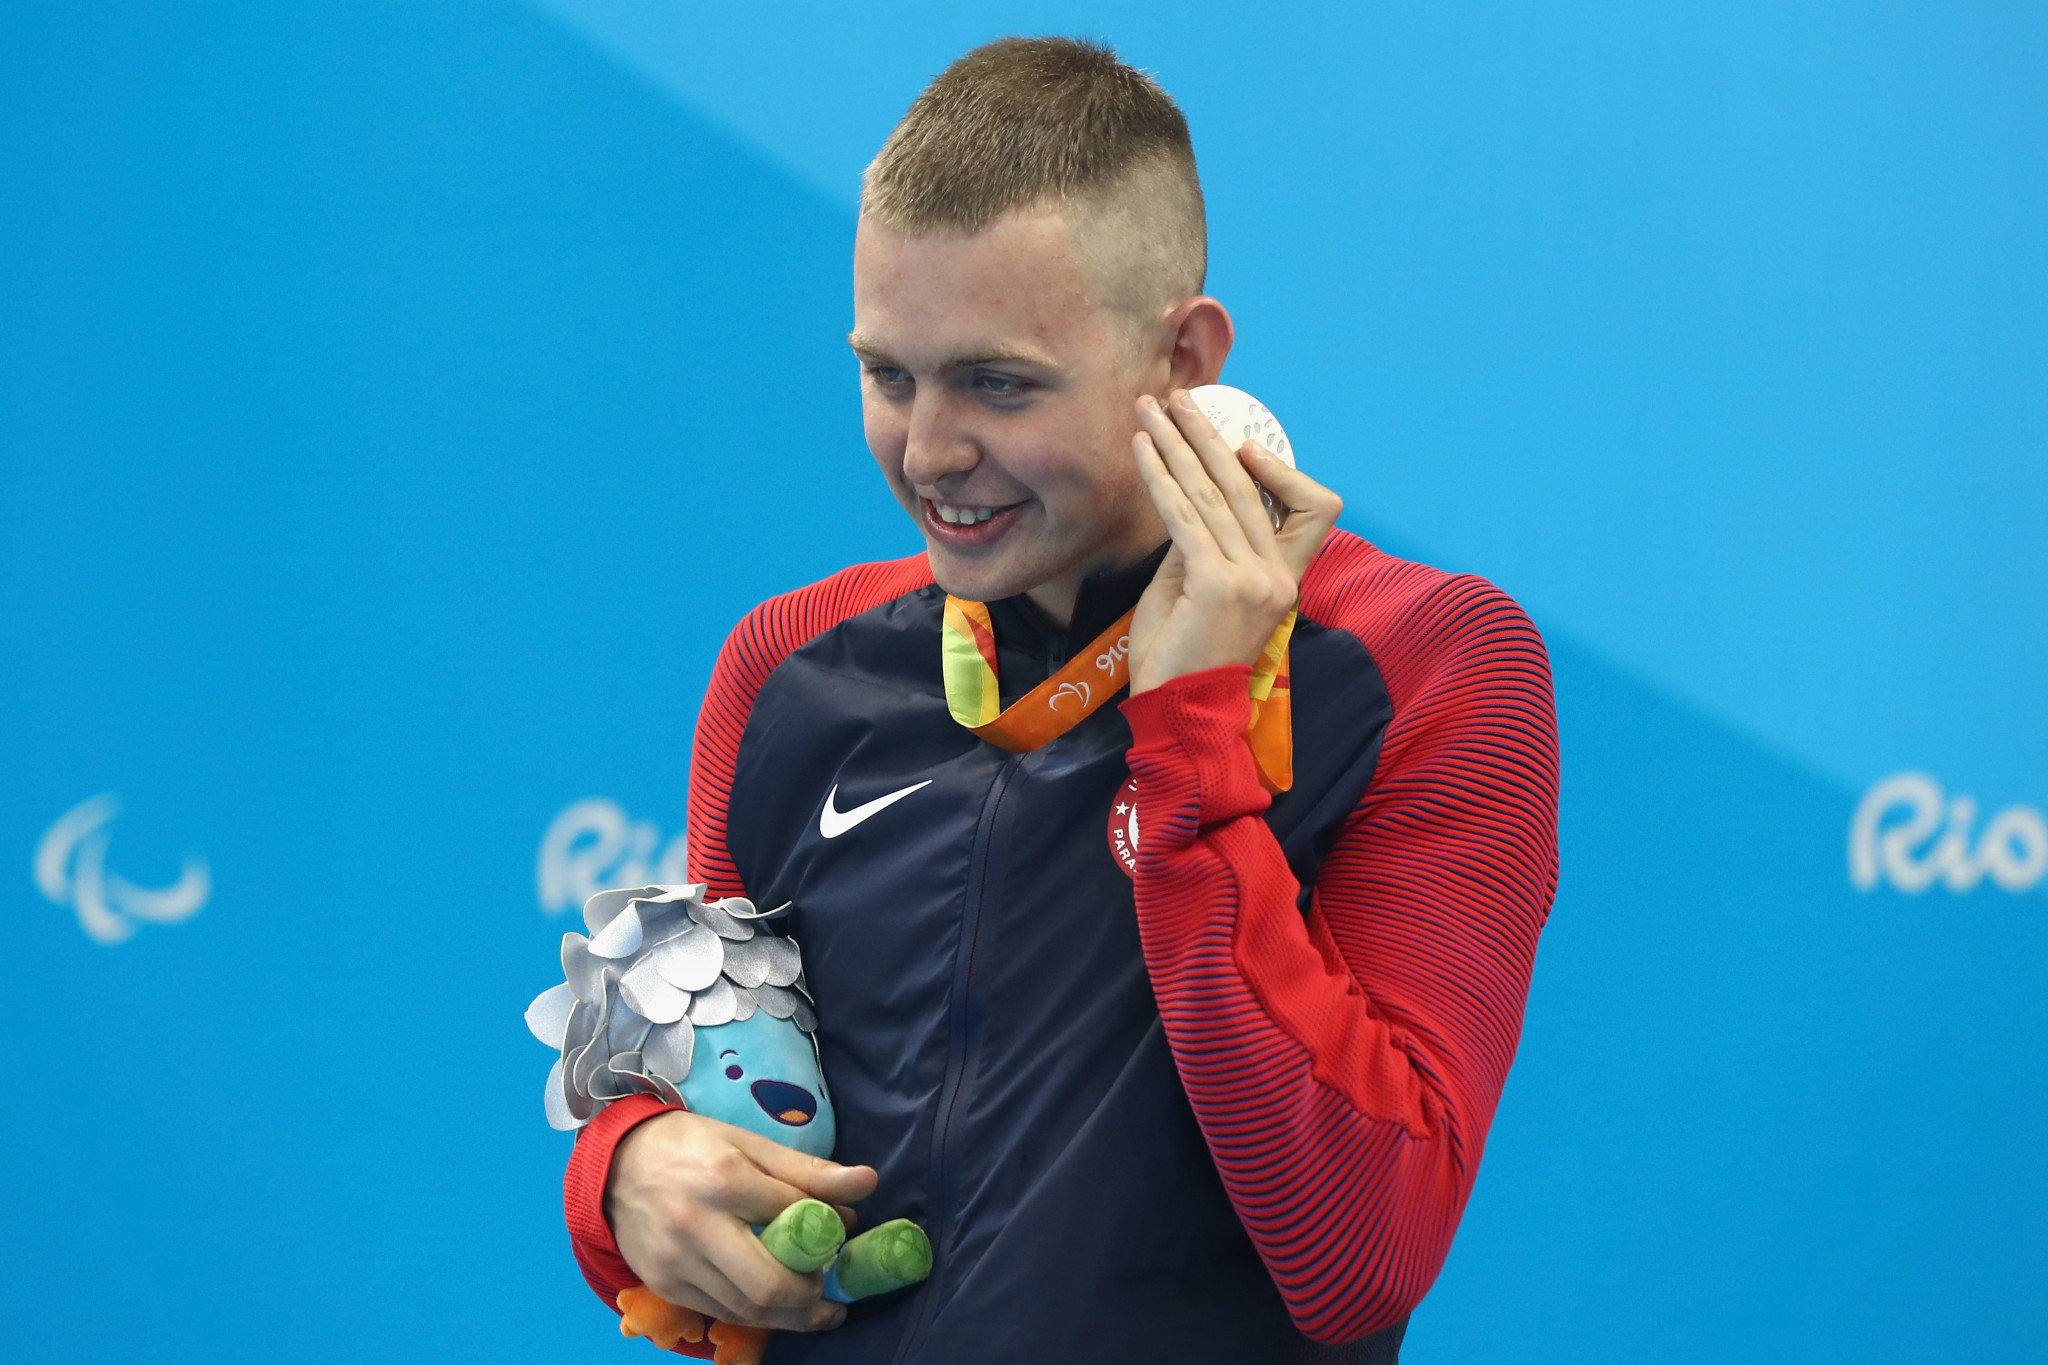 Paralympic medallists lead United States swimming team for Parapan American Games at Lima 2019